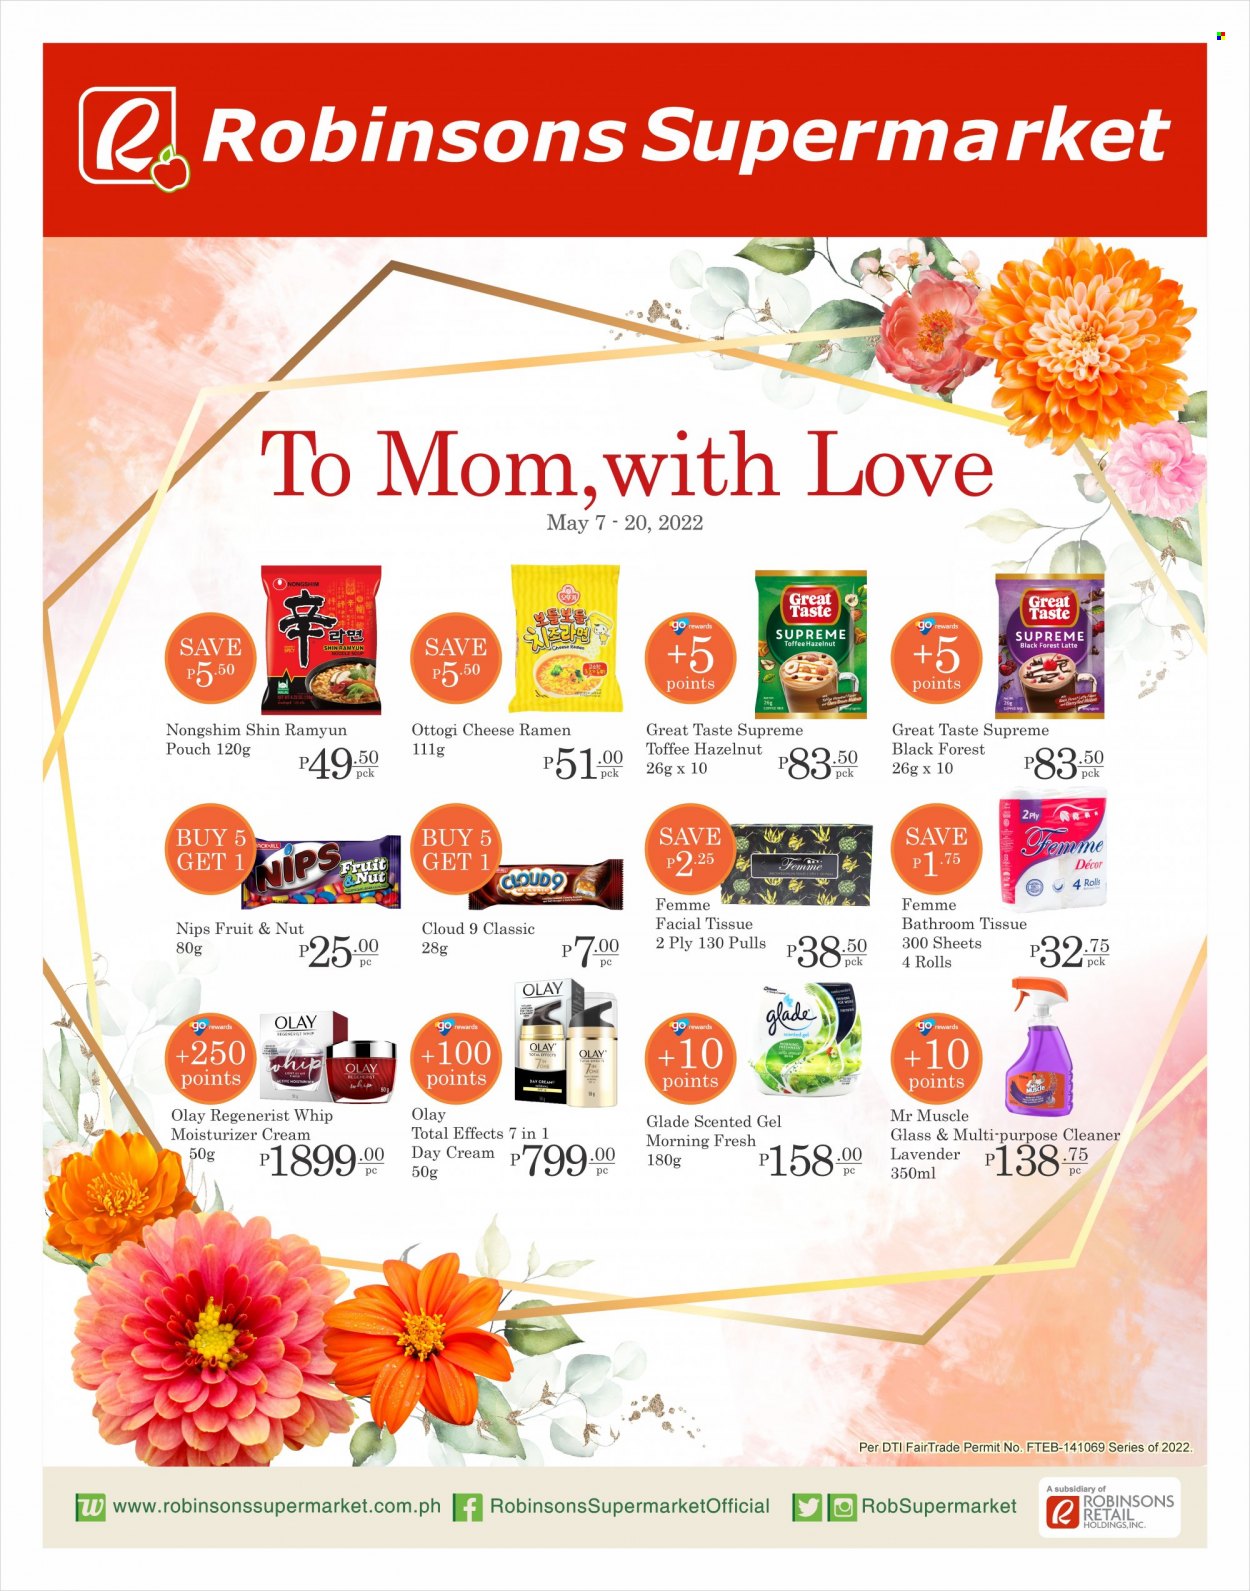 thumbnail - Robinsons Supermarket offer  - 7.5.2022 - 20.5.2022 - Sales products - ramen, soup, noodles cup, noodles, cheese, toffee, Cloud 9, NIPS, coffee, bath tissue, cleaner, Mr. Muscle, day cream, moisturizer, Olay. Page 1.